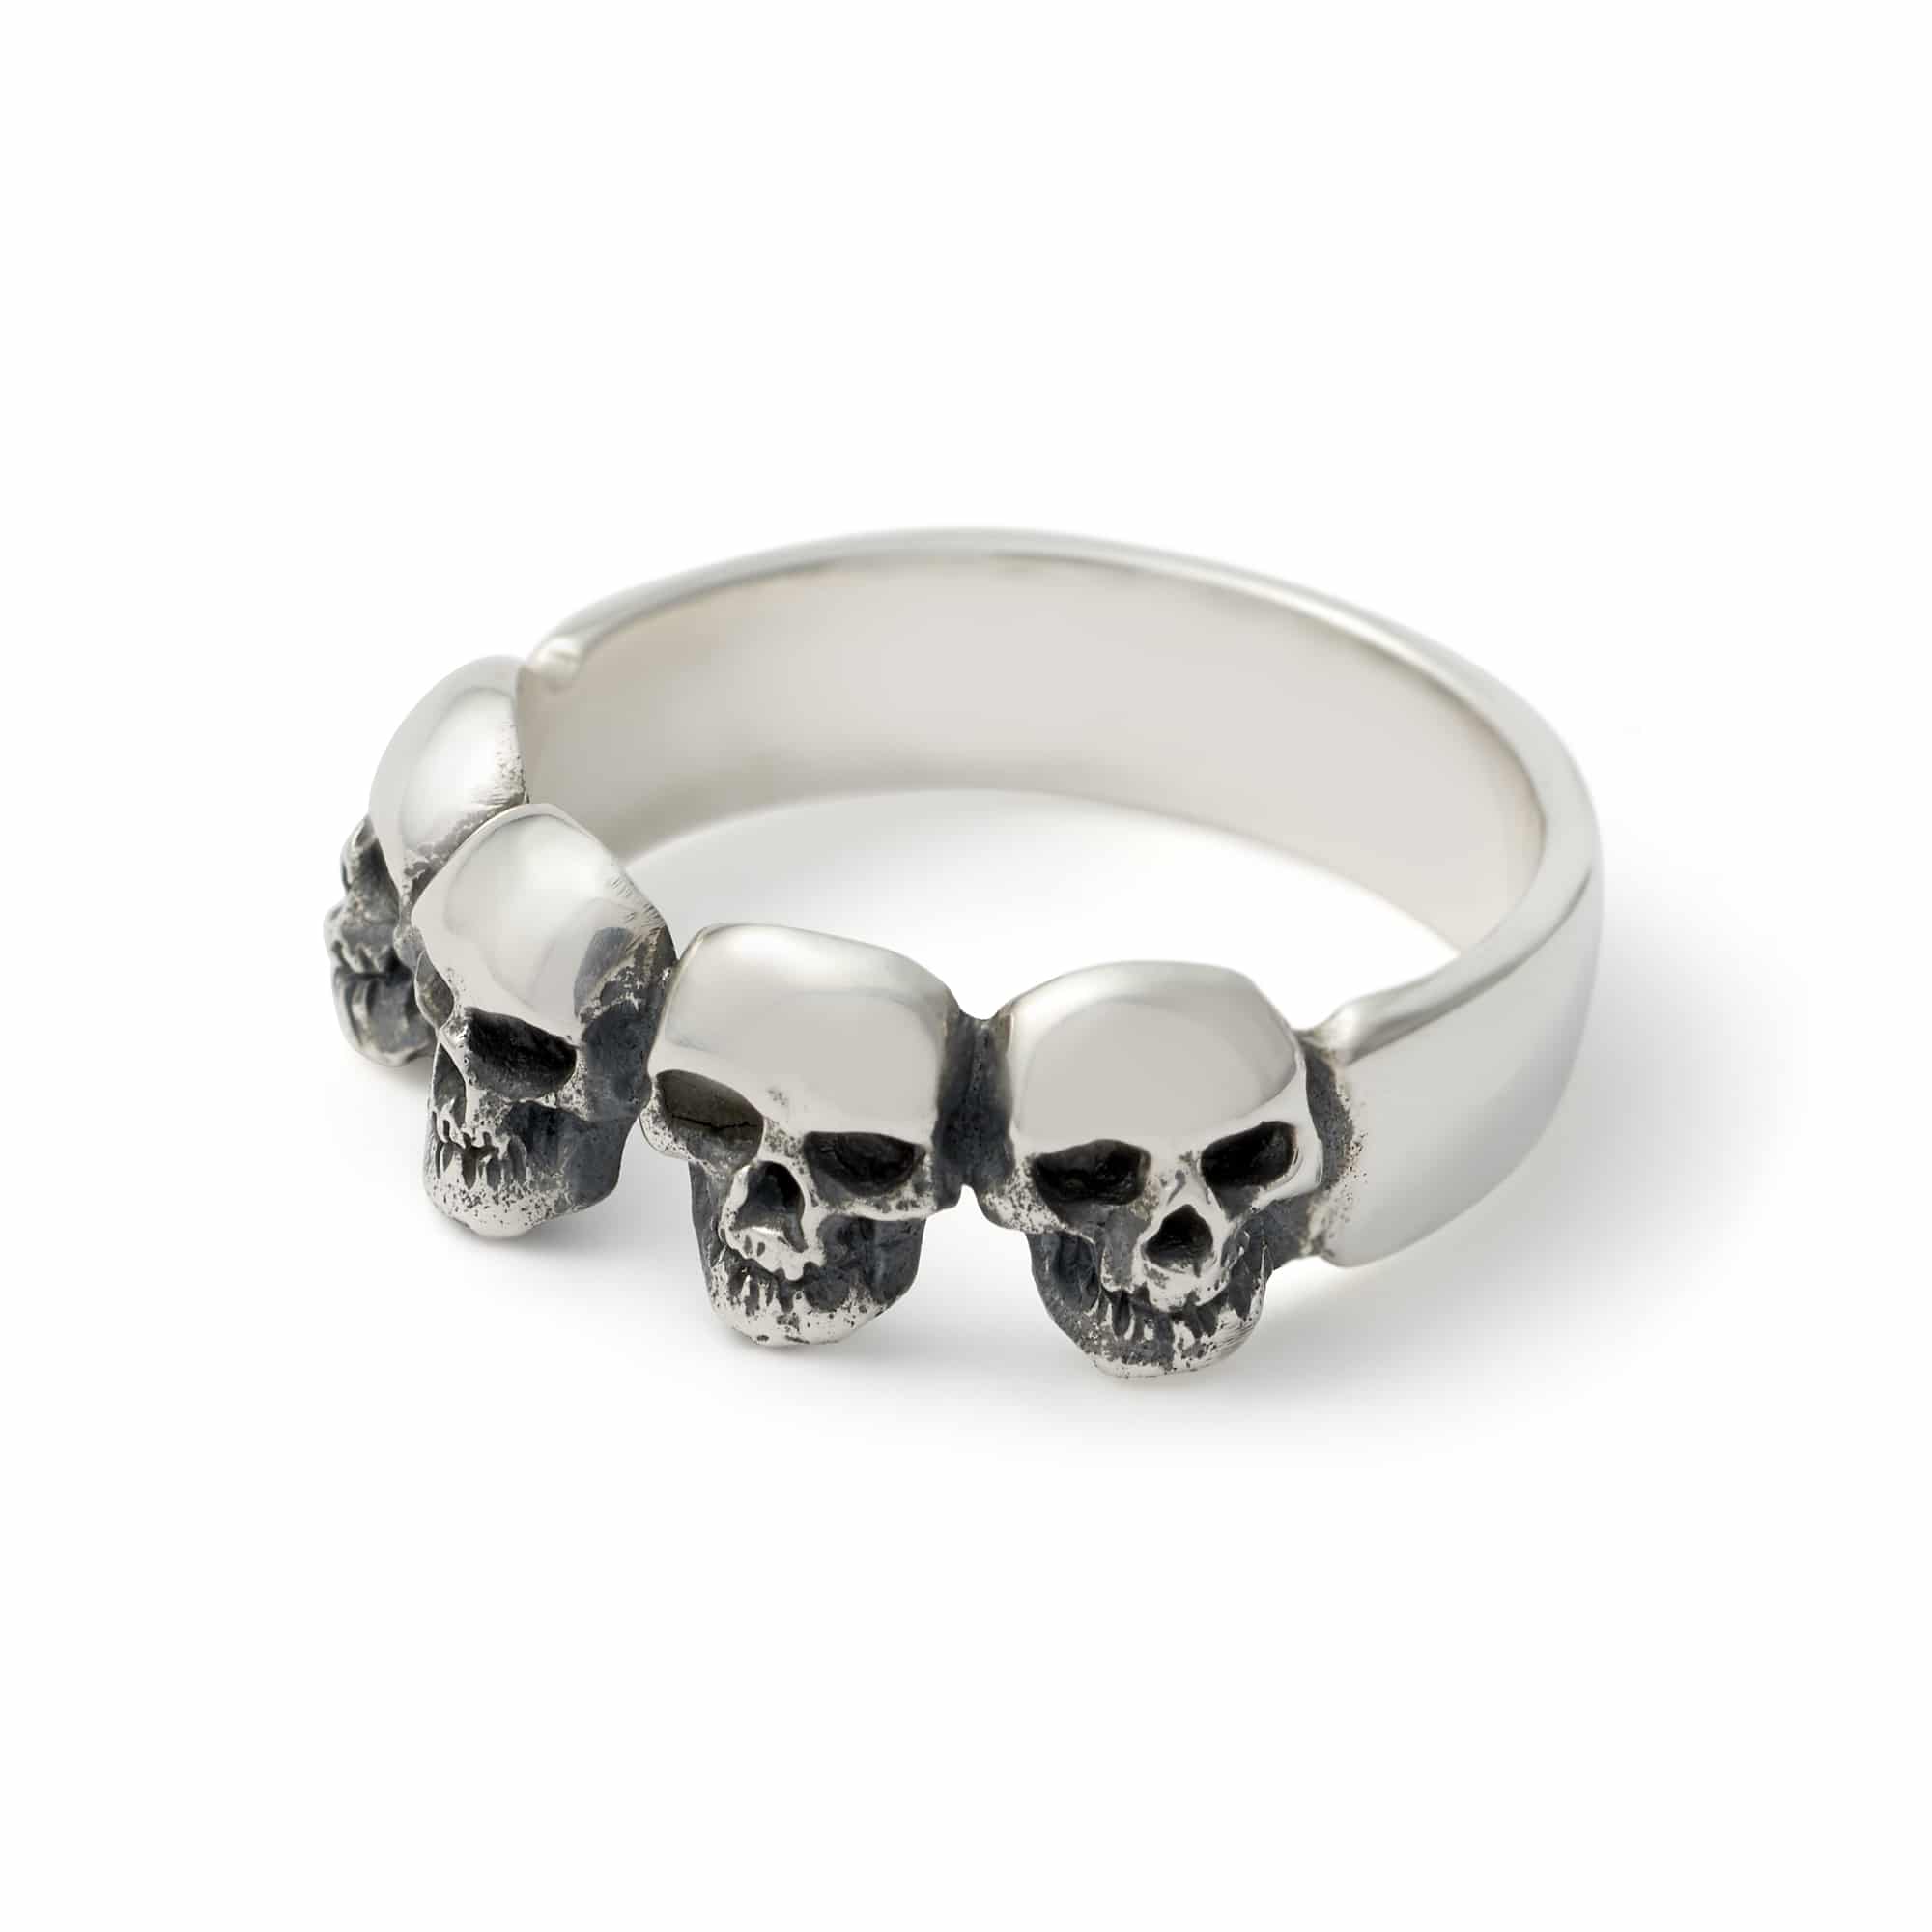 4 Small Skulls Ring - The Great Frog